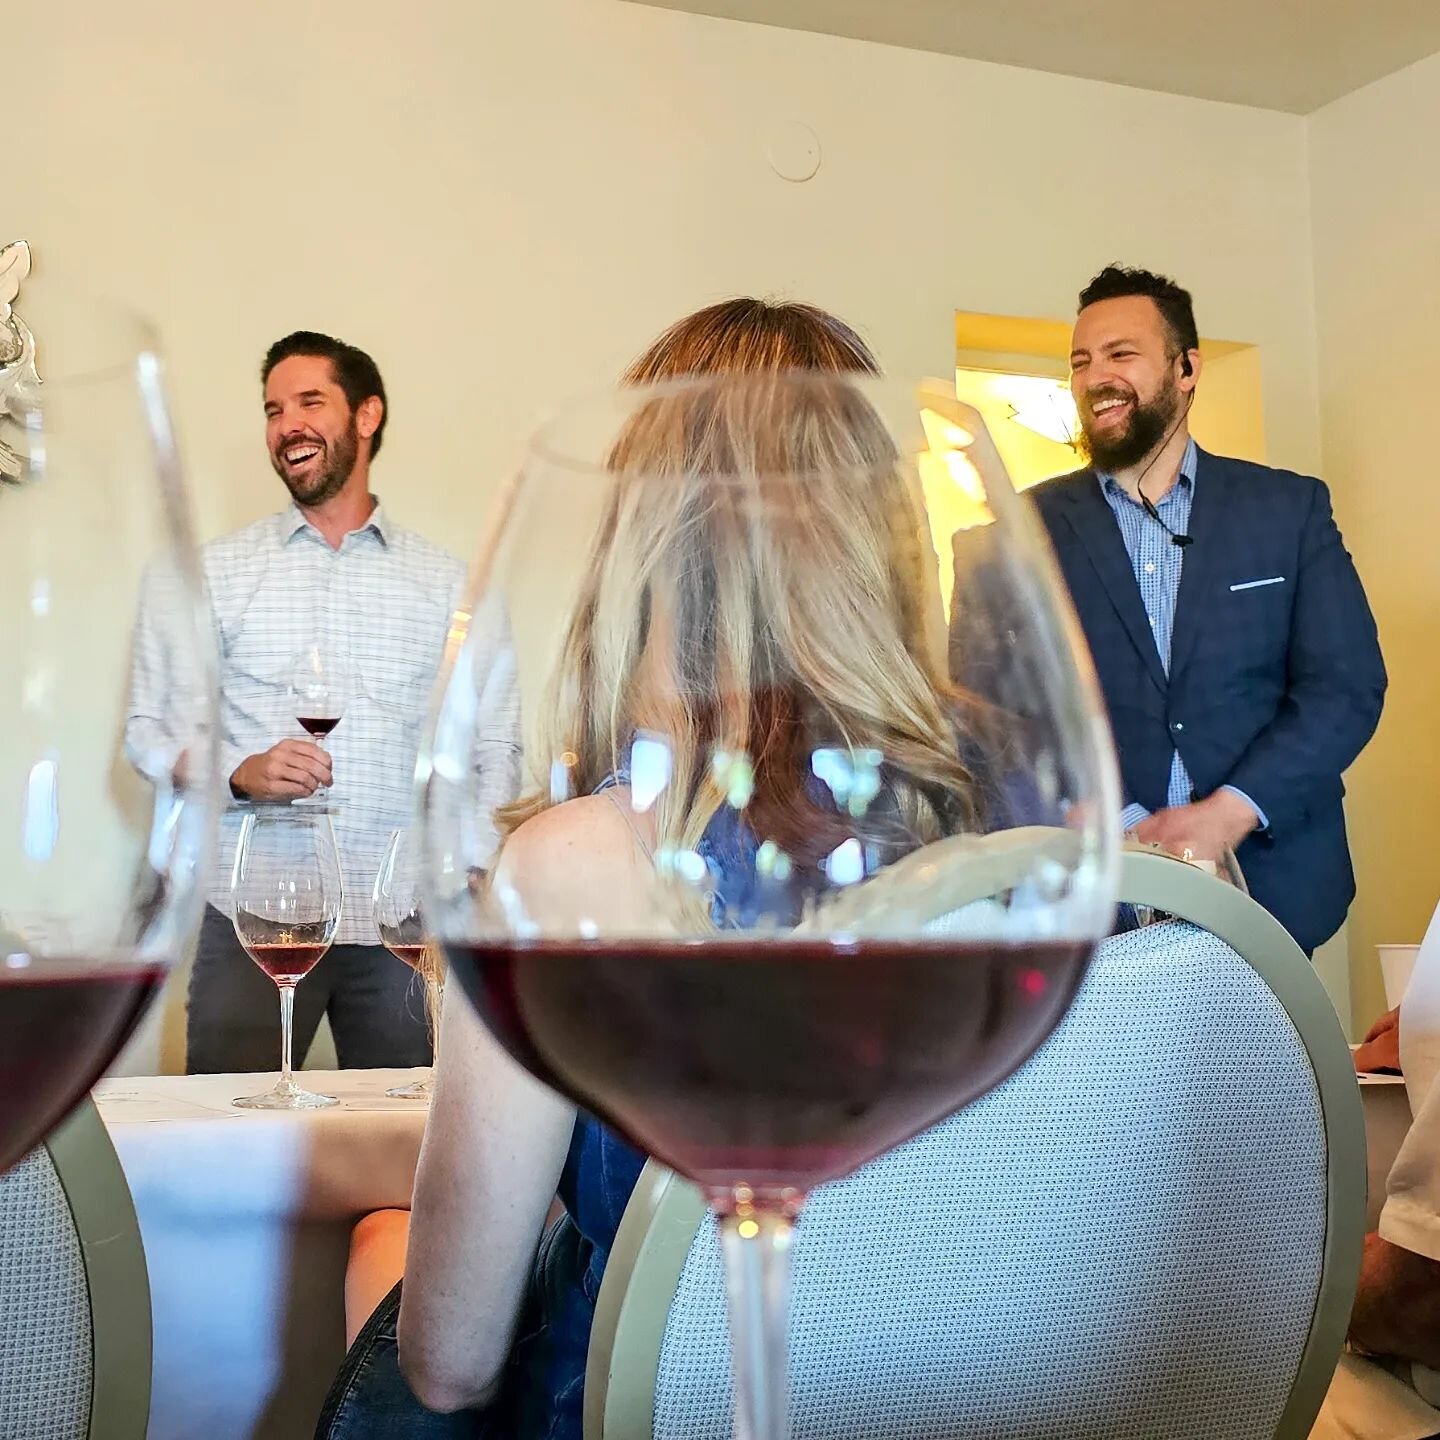 Current view at @wrigleymansion Festivin wine weekend! Italian wine class with @yeager7483 of @giulianaimportsusa and a guest appearance by @jcabsommelier 😉. Wines: Ciacci Piccolomini d'Aragona Sangiovese (Rosso di Montalcino, Italy) and  2017 Ciacc